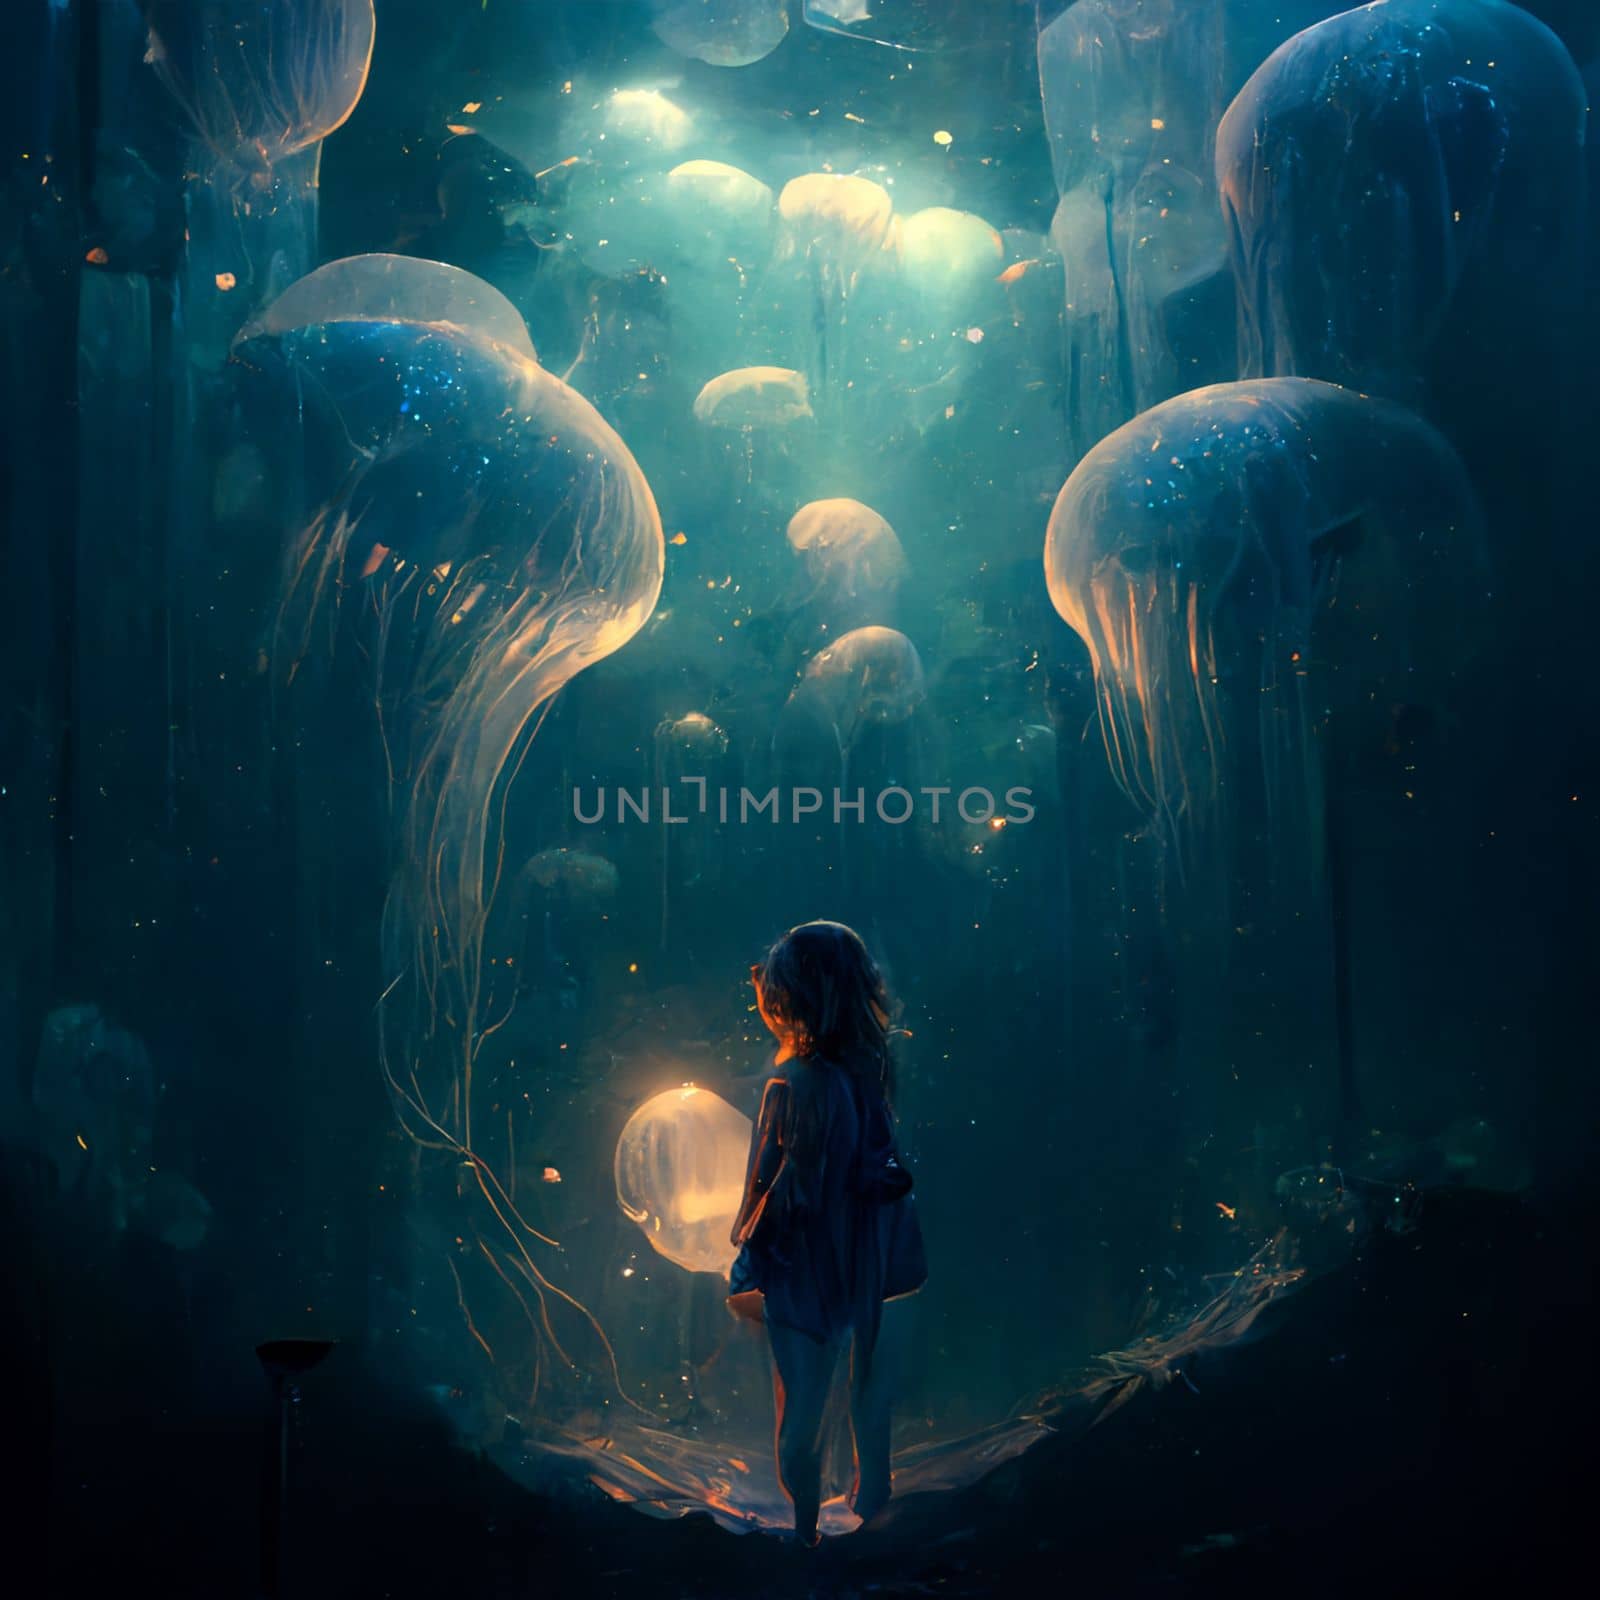 A girl stands around a flying flock of jellyfish by studiodav